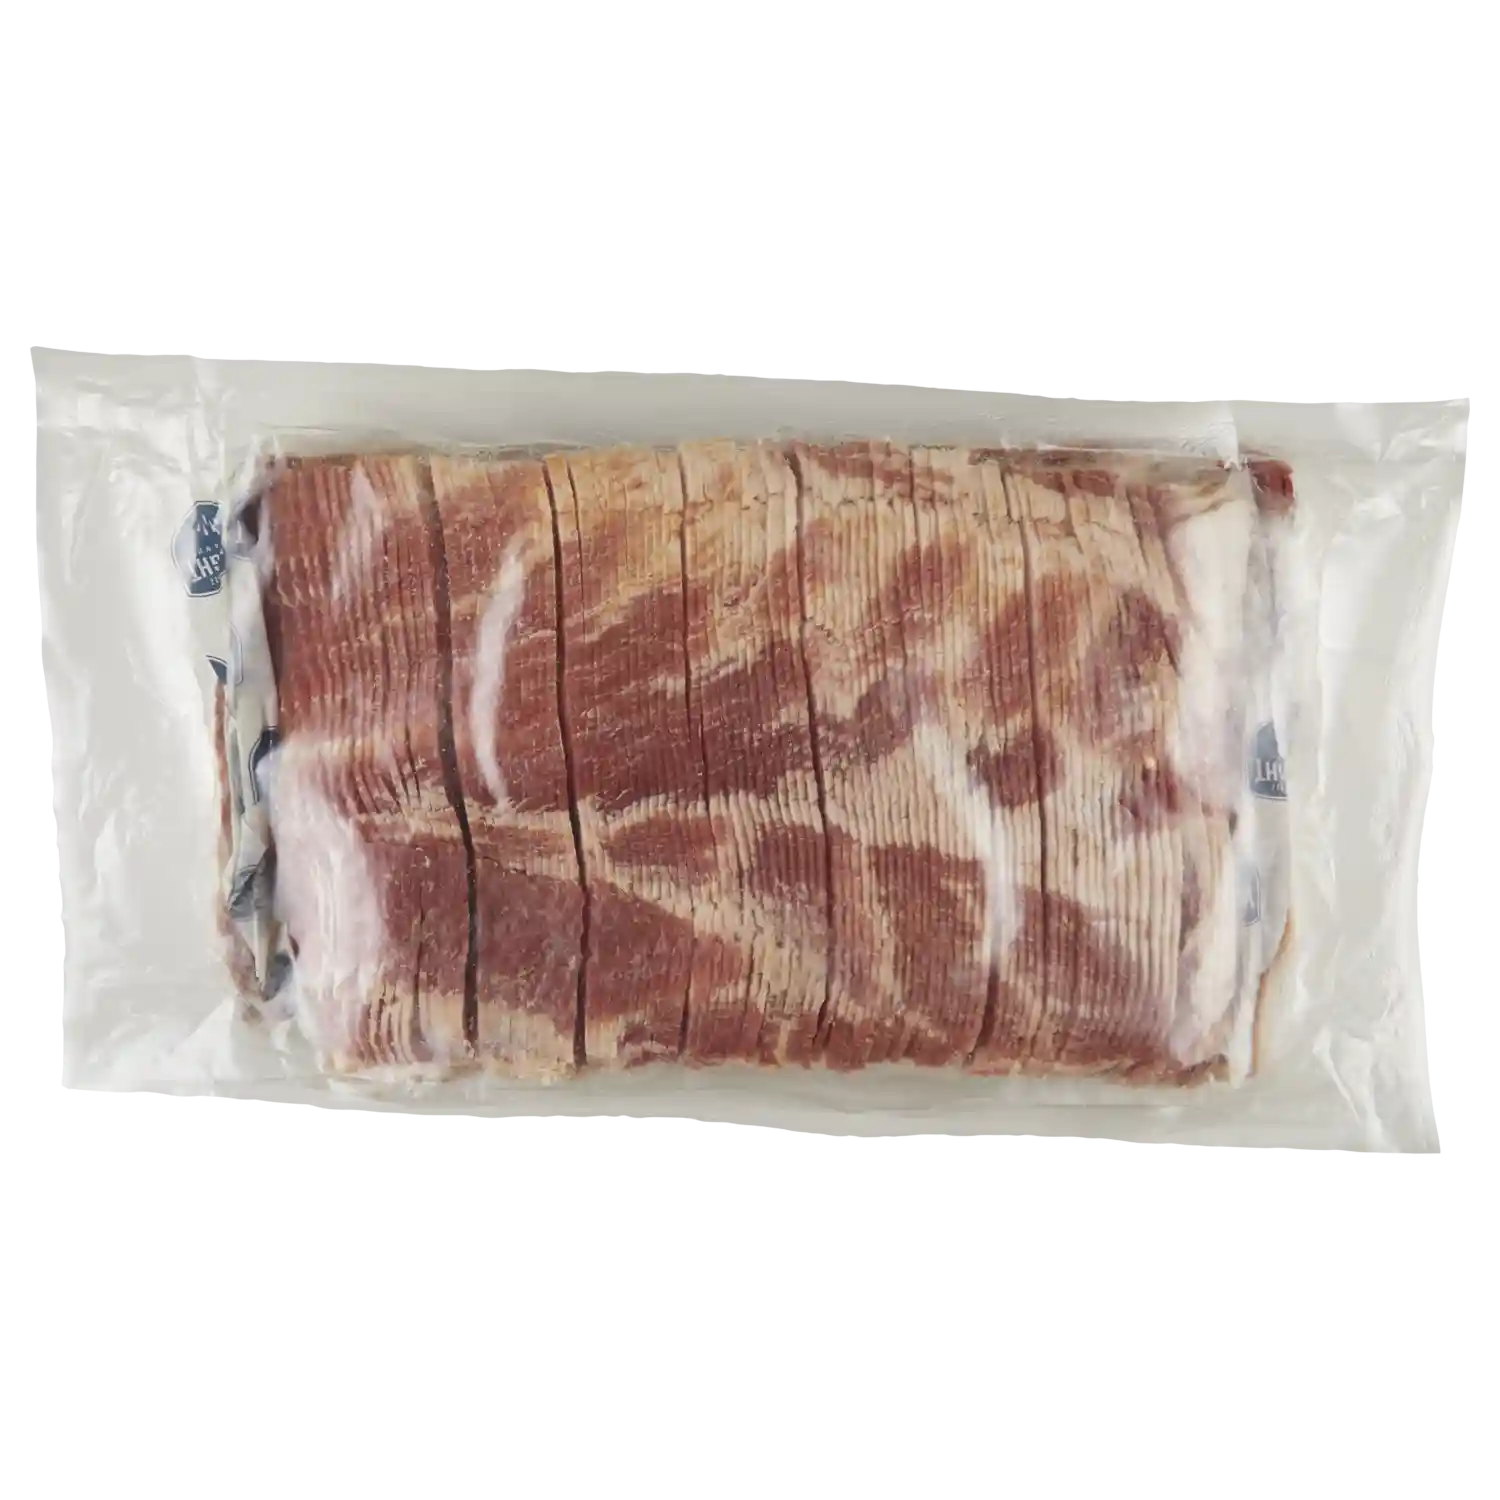 Wright® Brand Naturally Hickory Smoked Thick Sliced Bacon, Bulk, 30 Lbs, 10-14 Slices per Pound, Gas Flushed_image_31